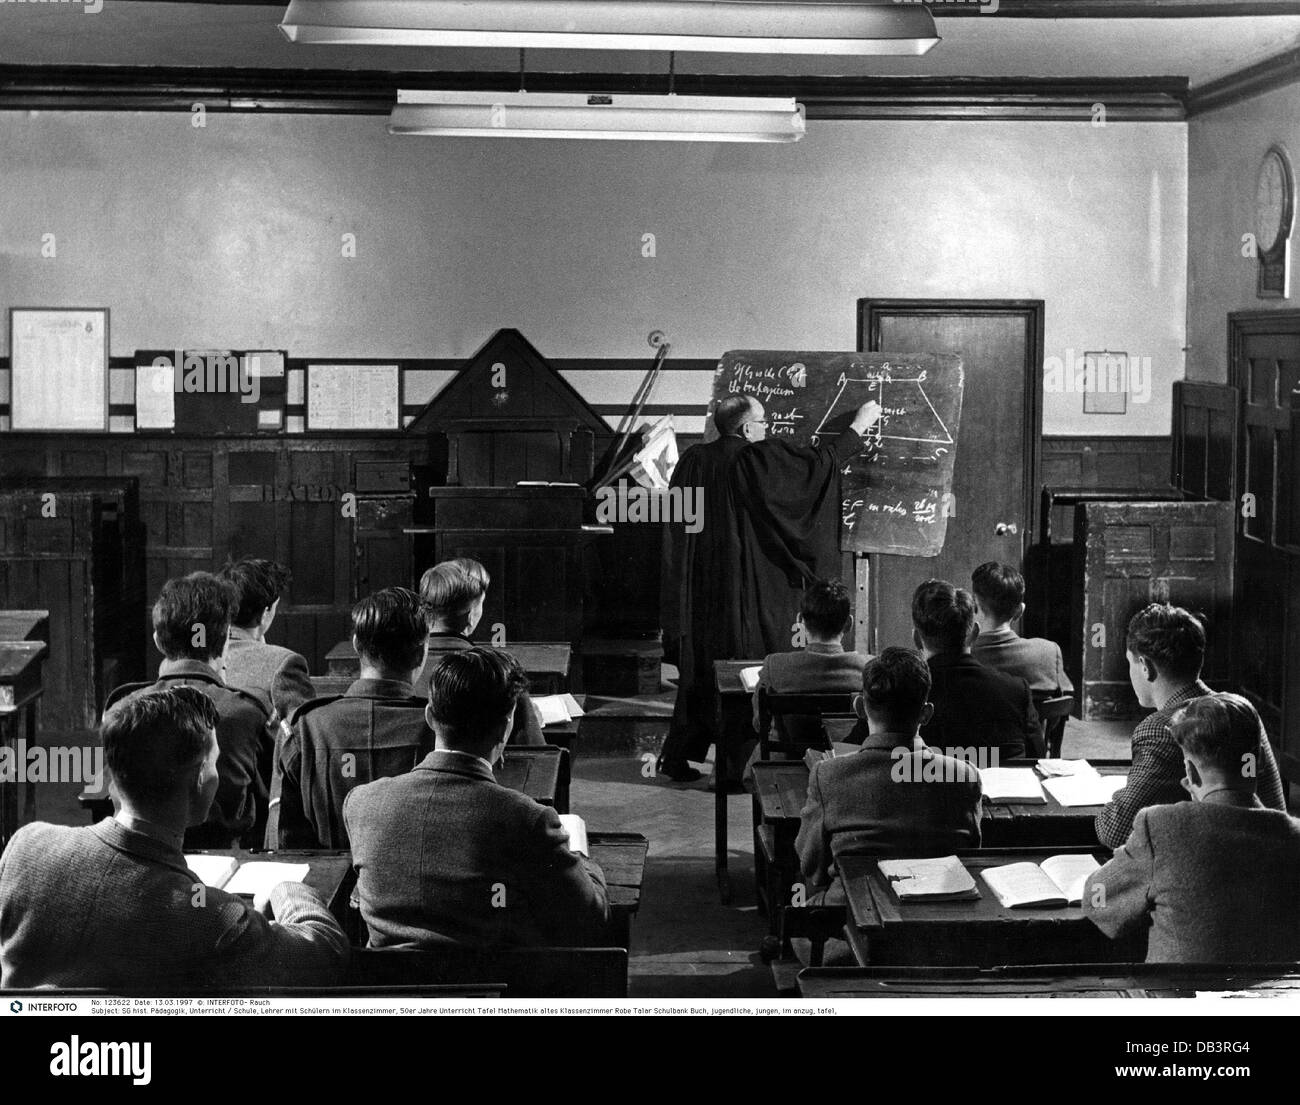 education, school, teacher and students in a classroom during a lesson, 1950s, Additional-Rights-Clearences-Not Available Stock Photo